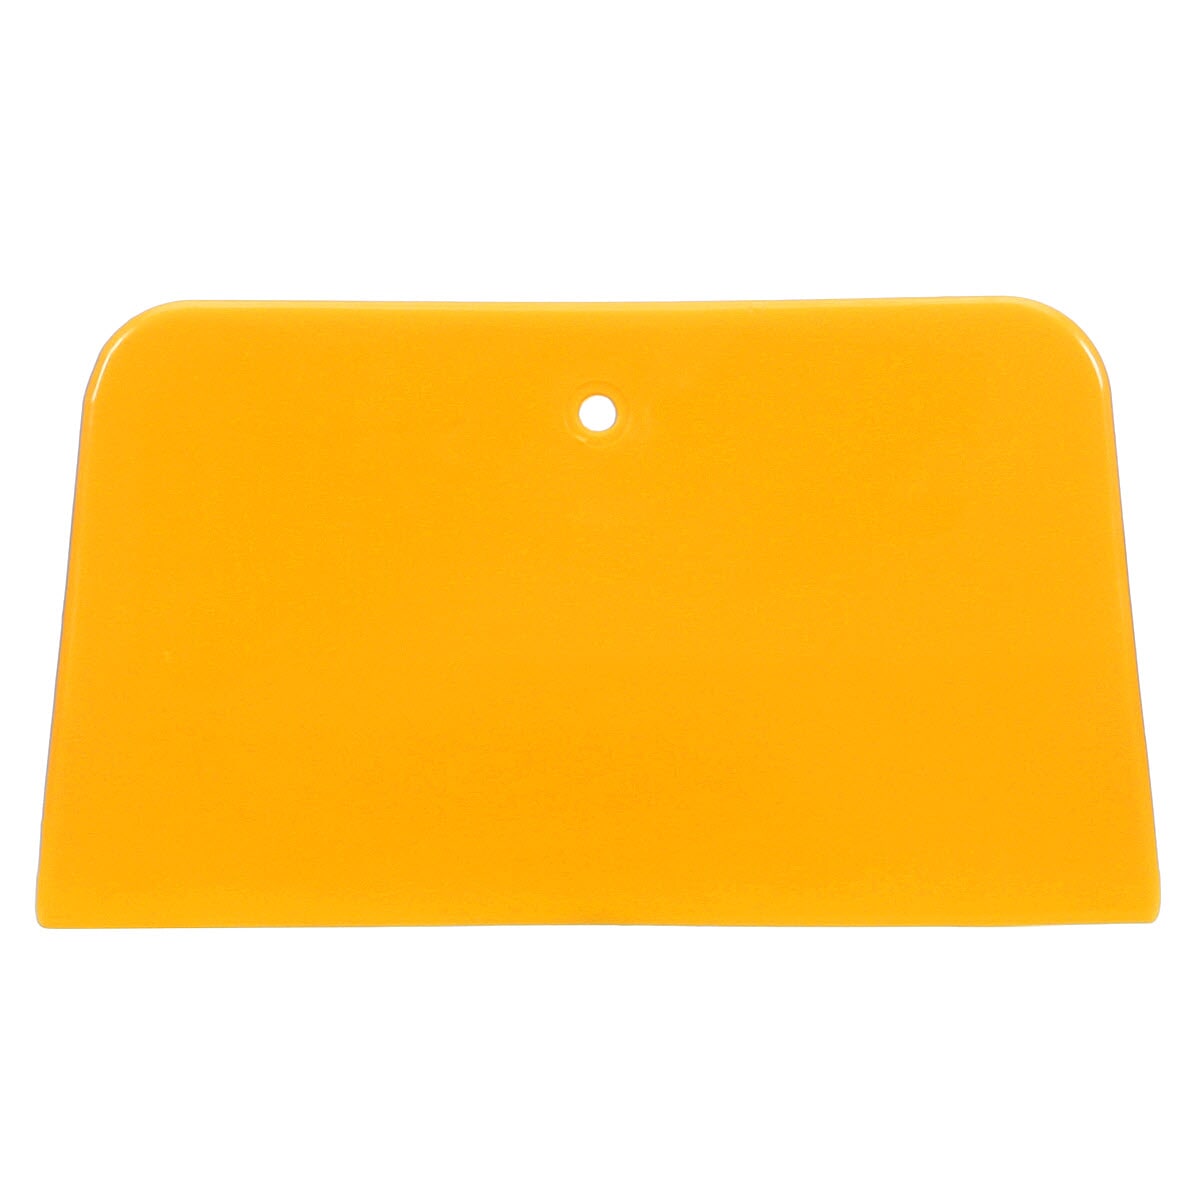 3M 7000125086 Spreader, 3 in W, For Use With Body Fillers, Putties and Glazes, Plastic, Yellow